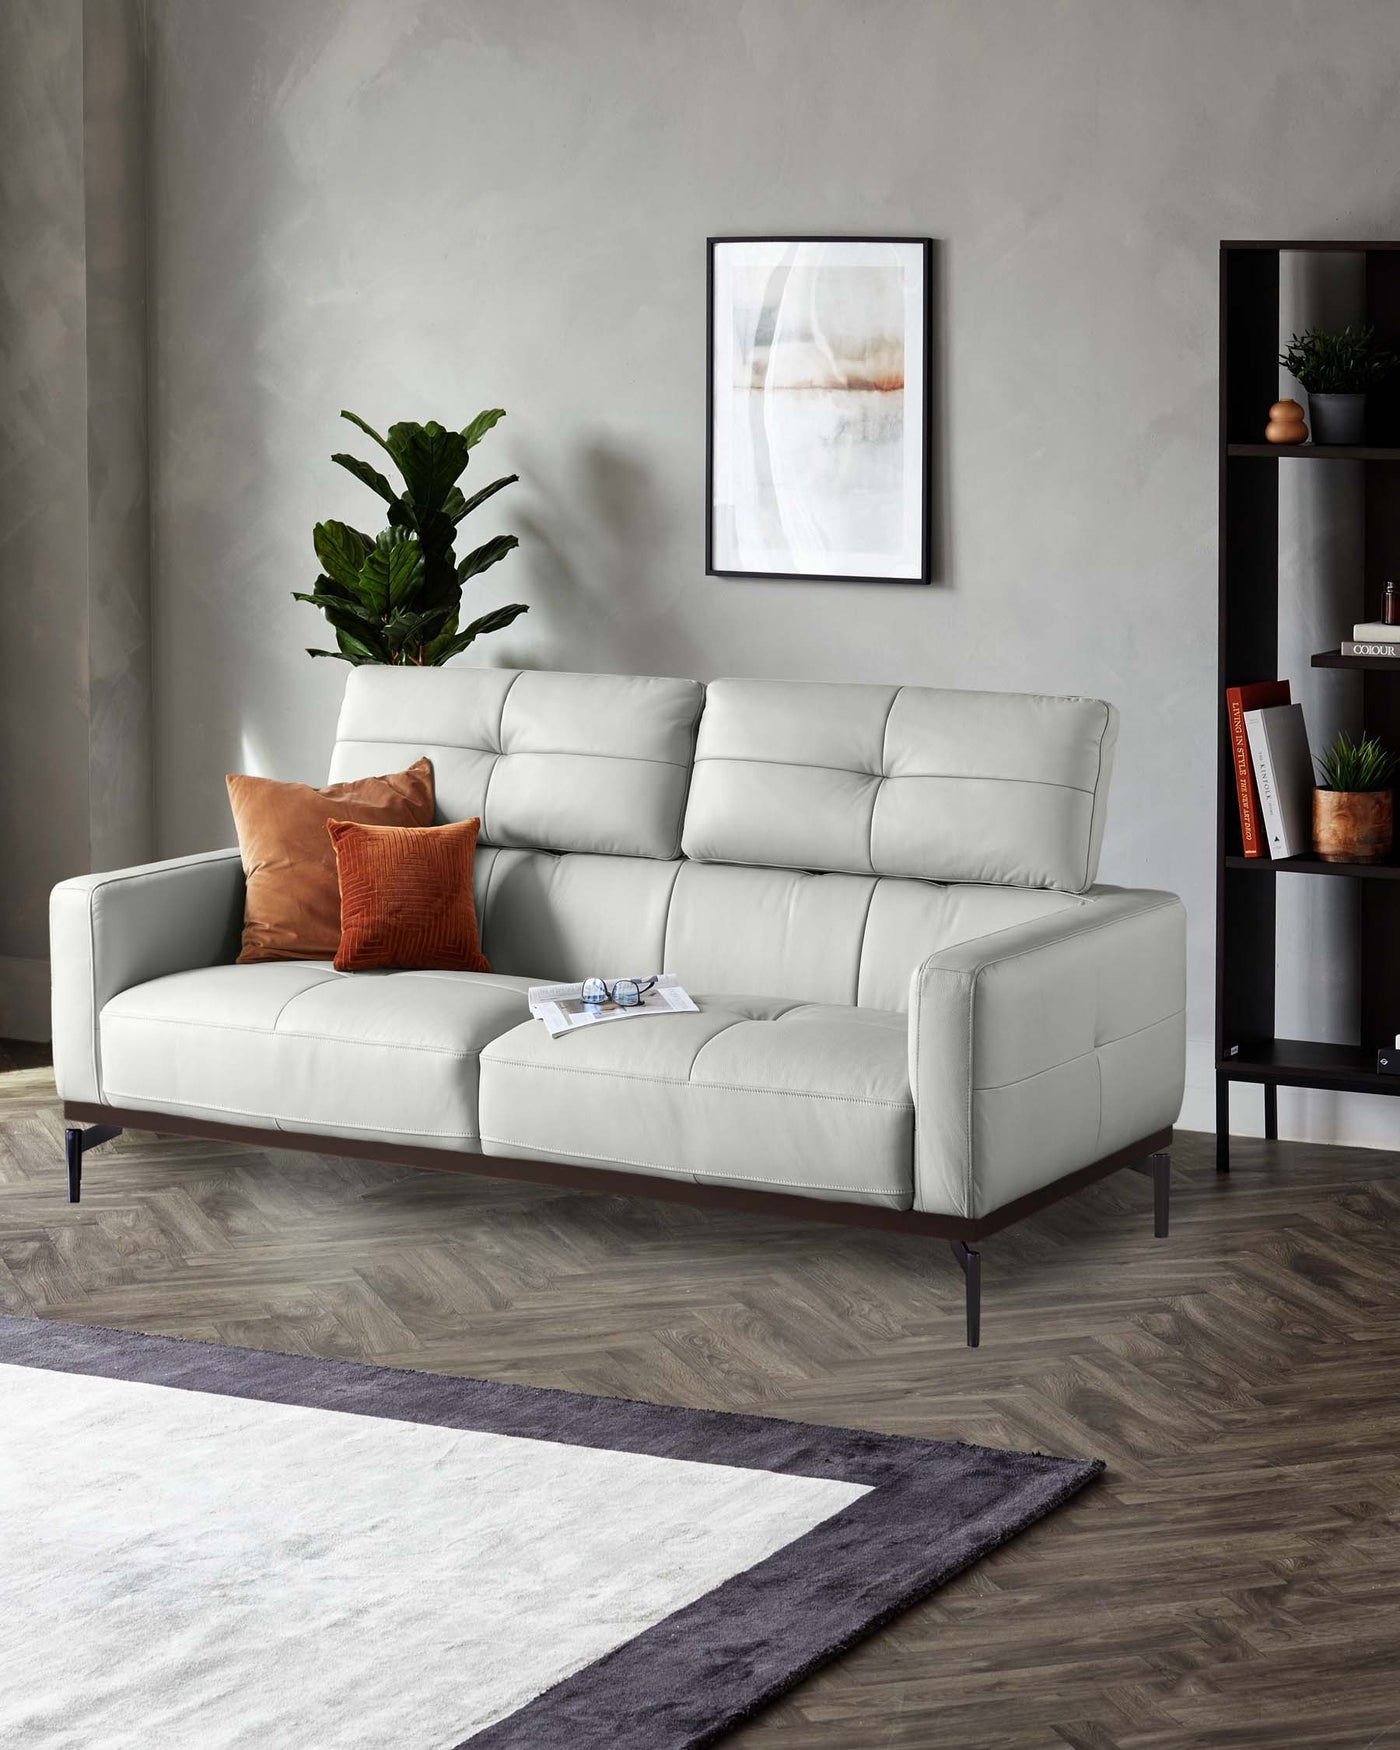 Modern light grey upholstered sectional sofa with clean lines and dark wooden legs, positioned in a stylish living room setting with a minimalist black shelving unit in the background.